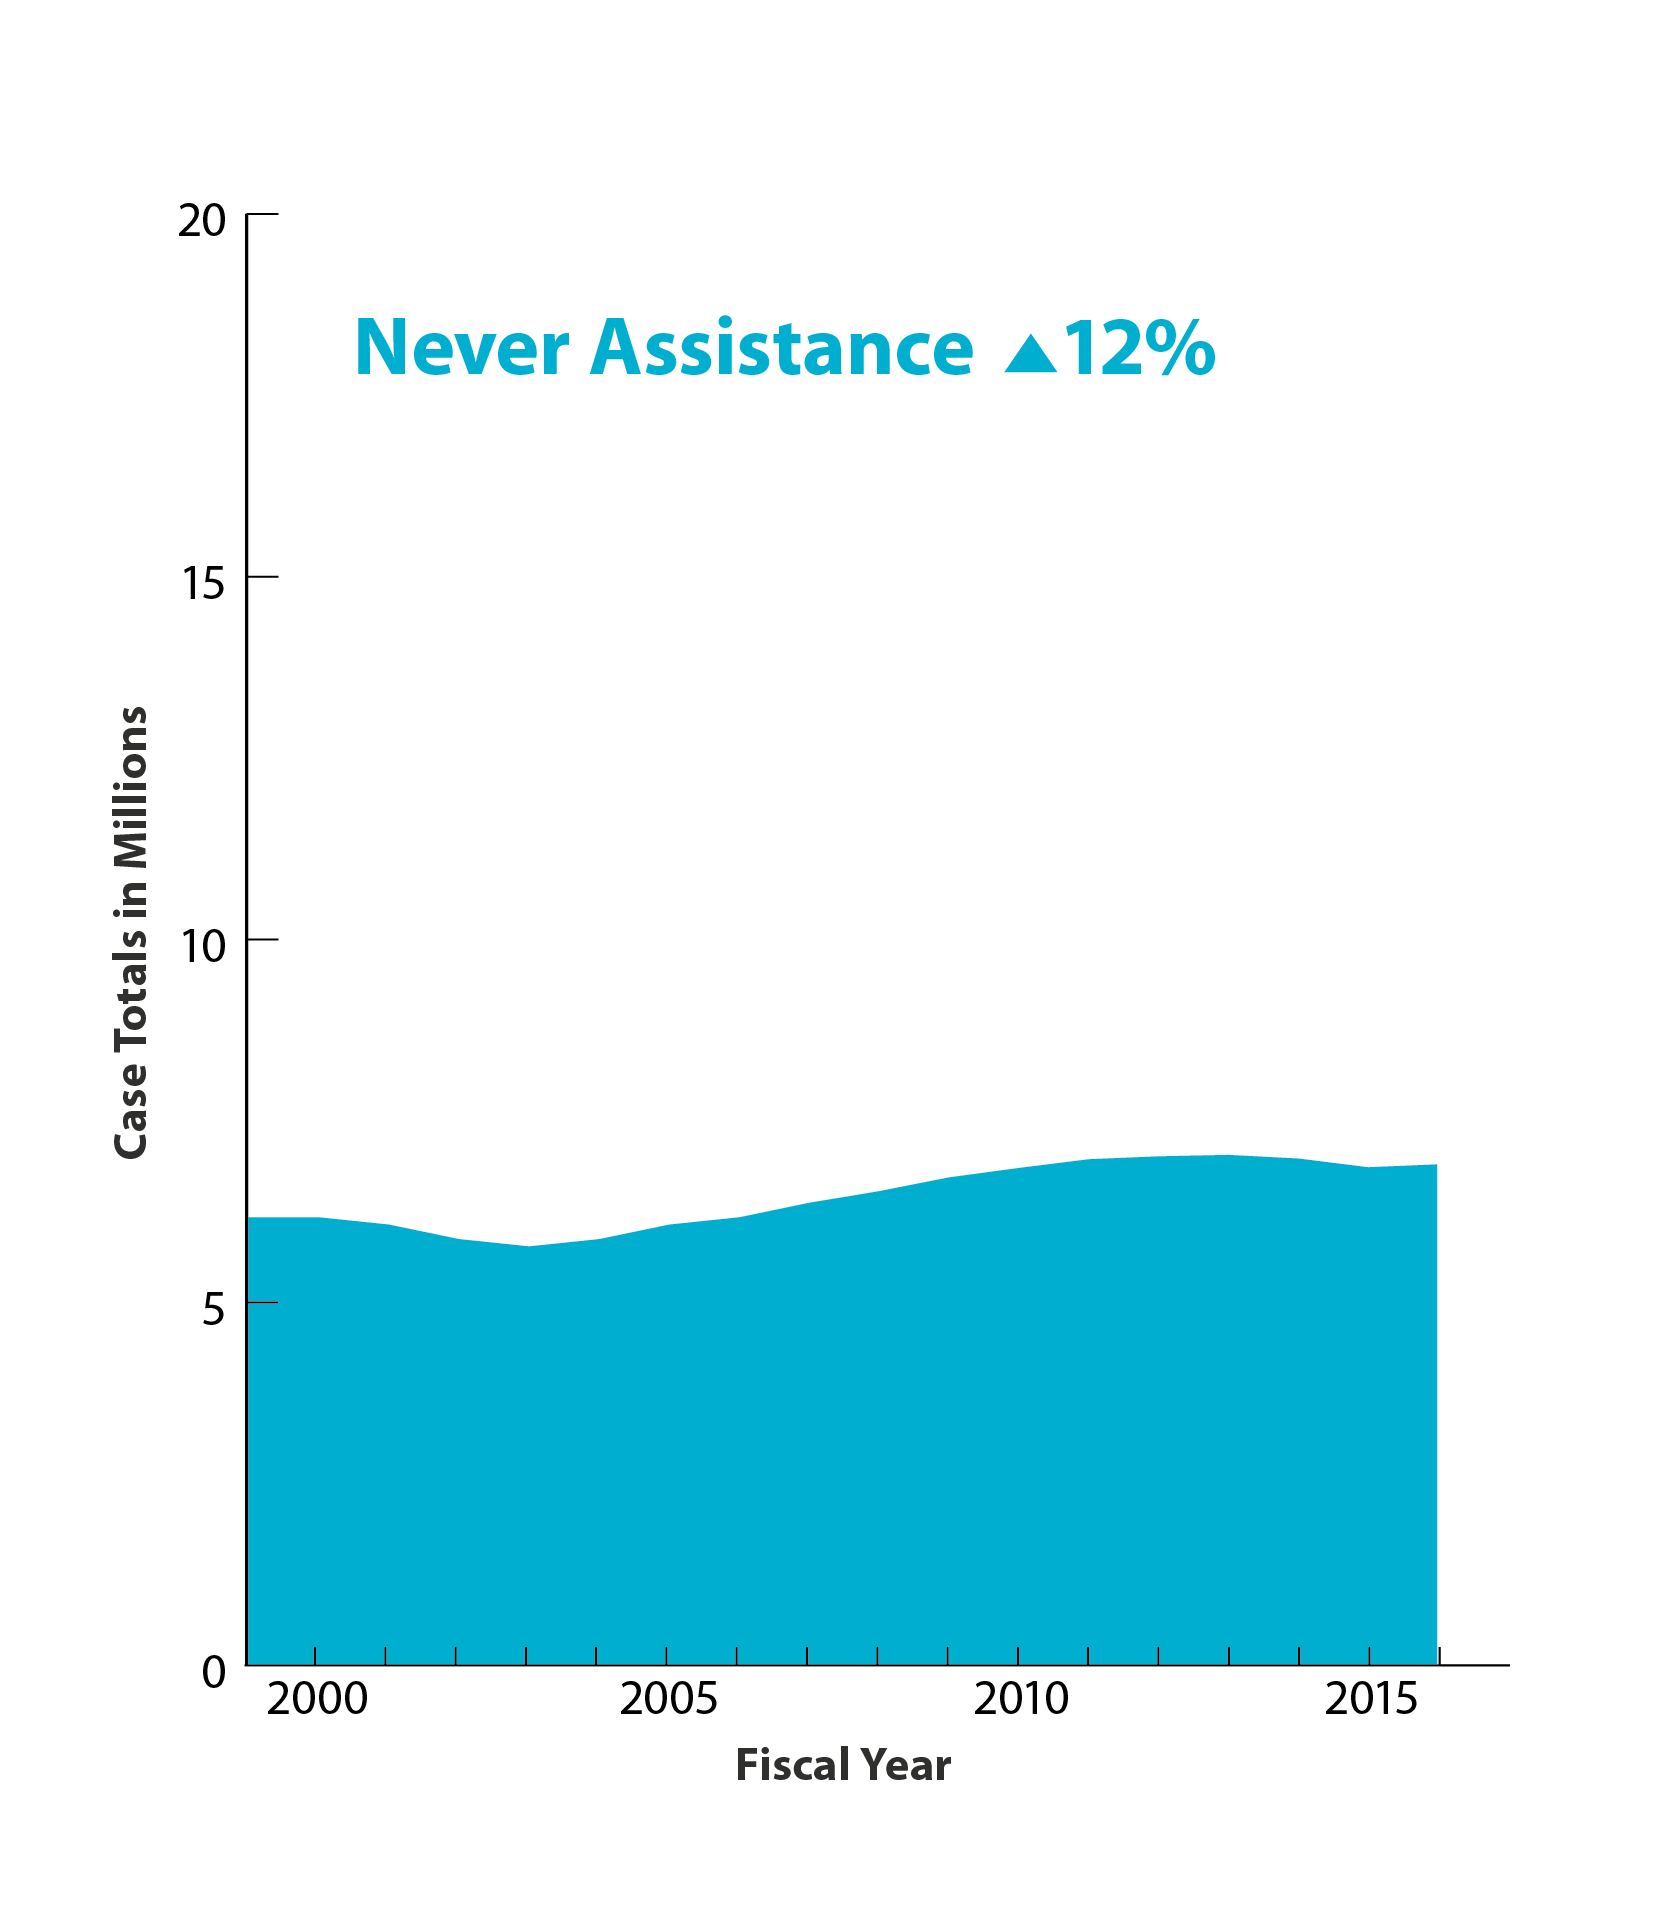 Never Assistance up 12%